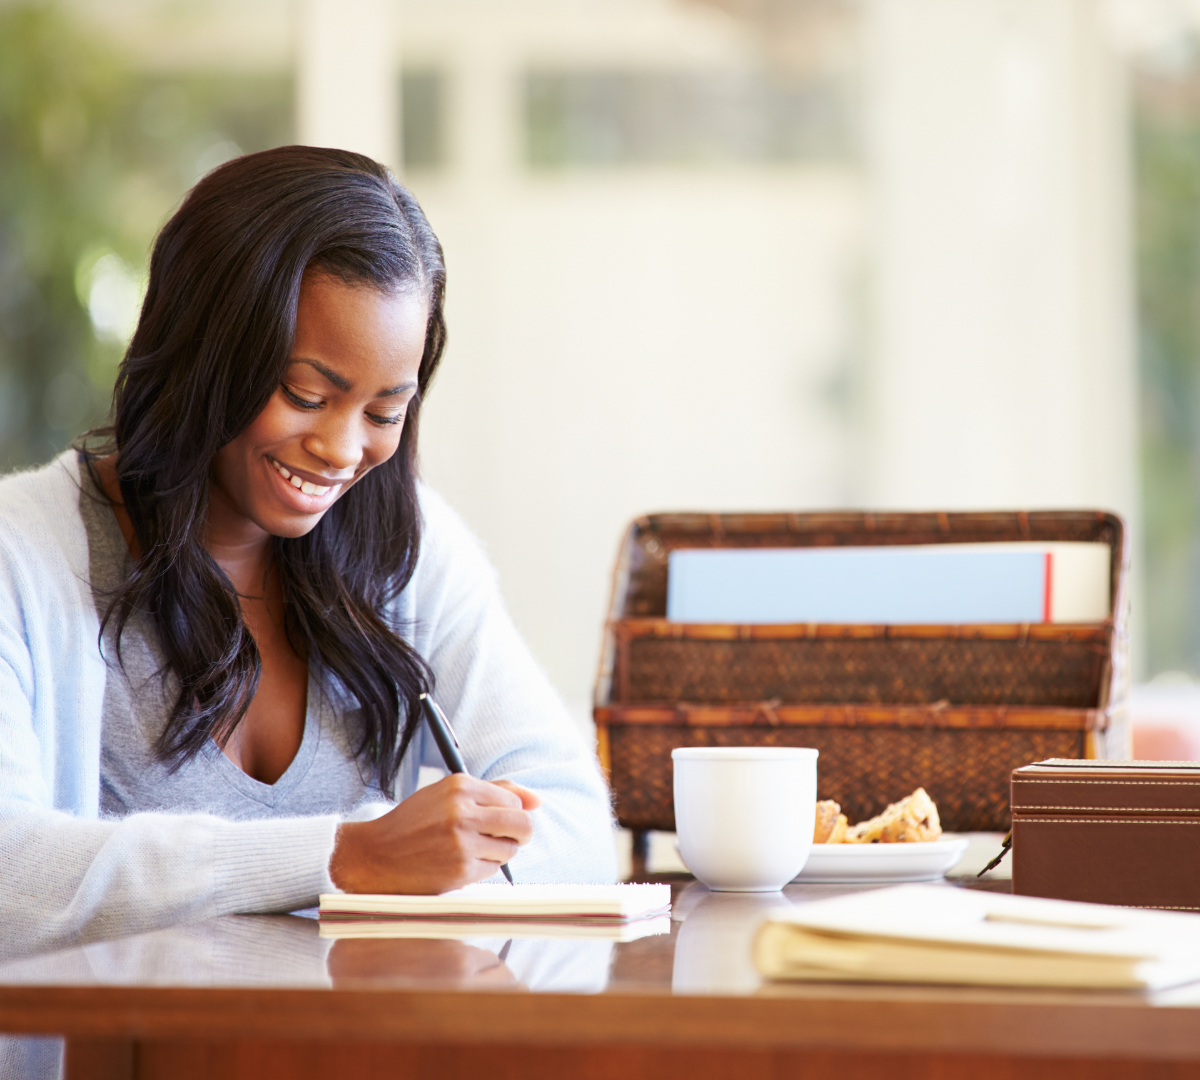 A black woman sitting at a desk and smiling. She holds a pen in her hand and is writing in a book